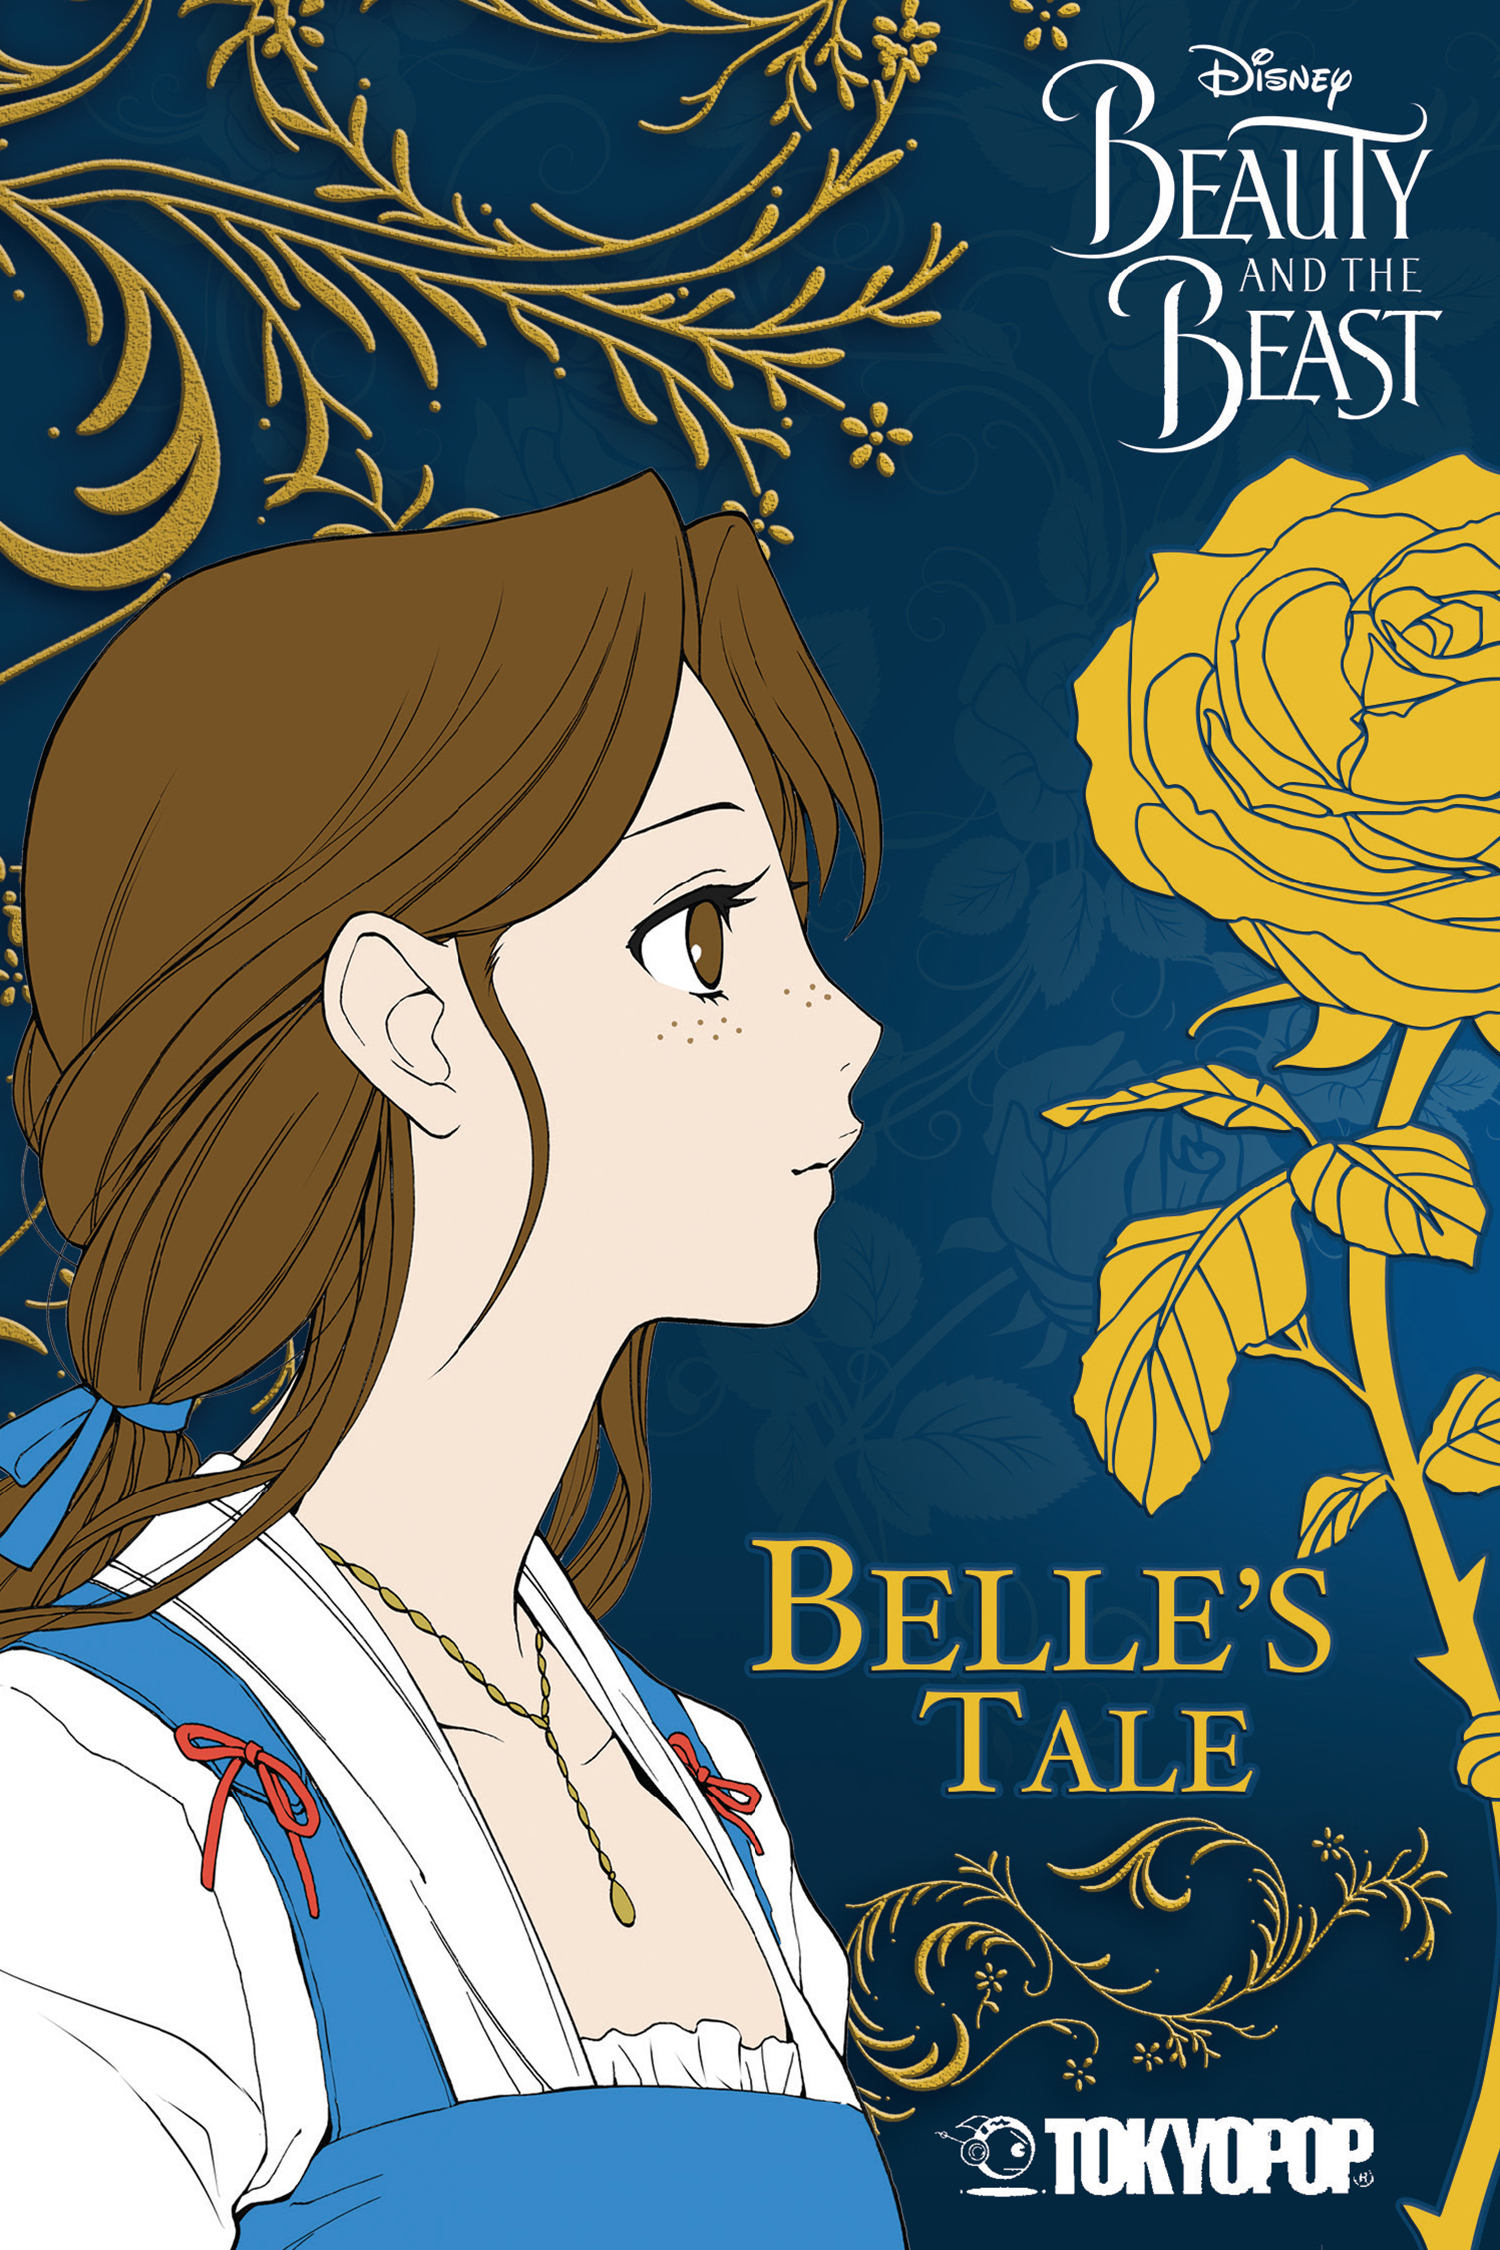 Disney Beauty and the Beast: Belle's Tale